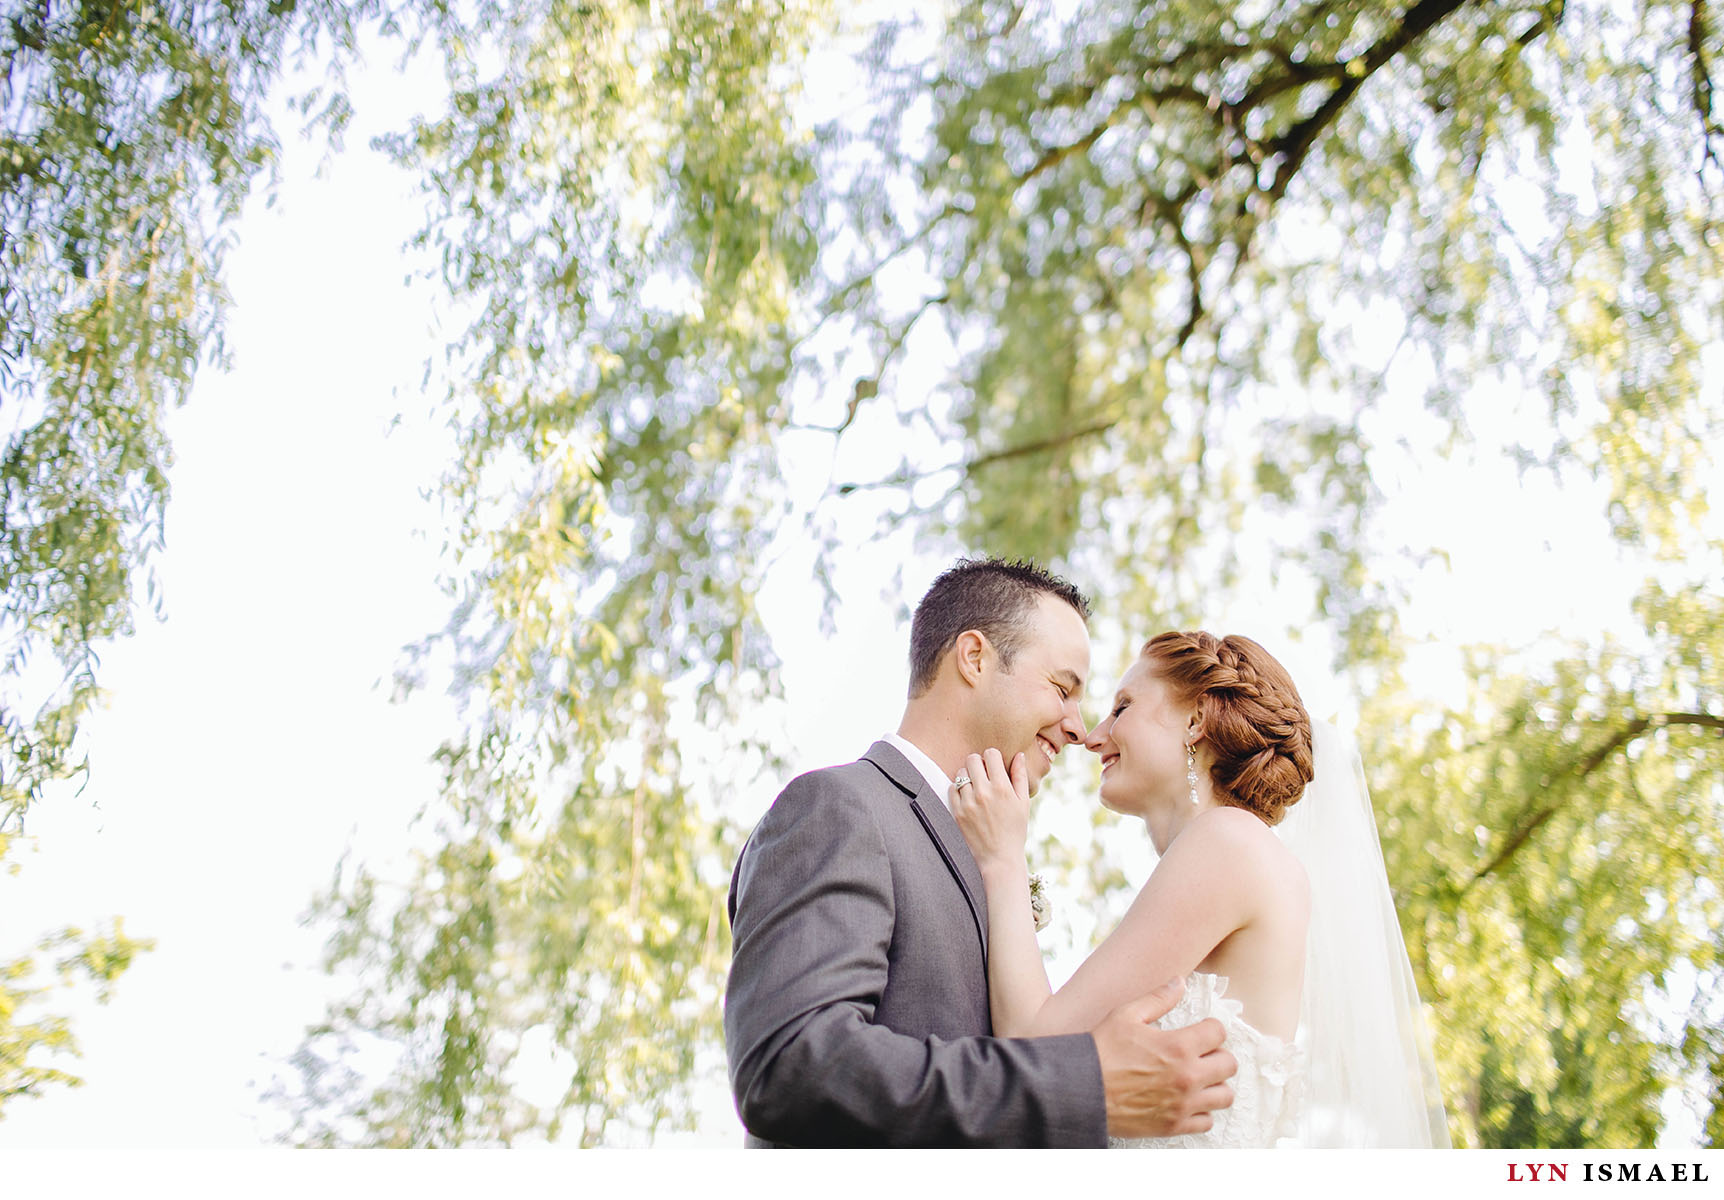 Bride and groom kissing under a willow tree.